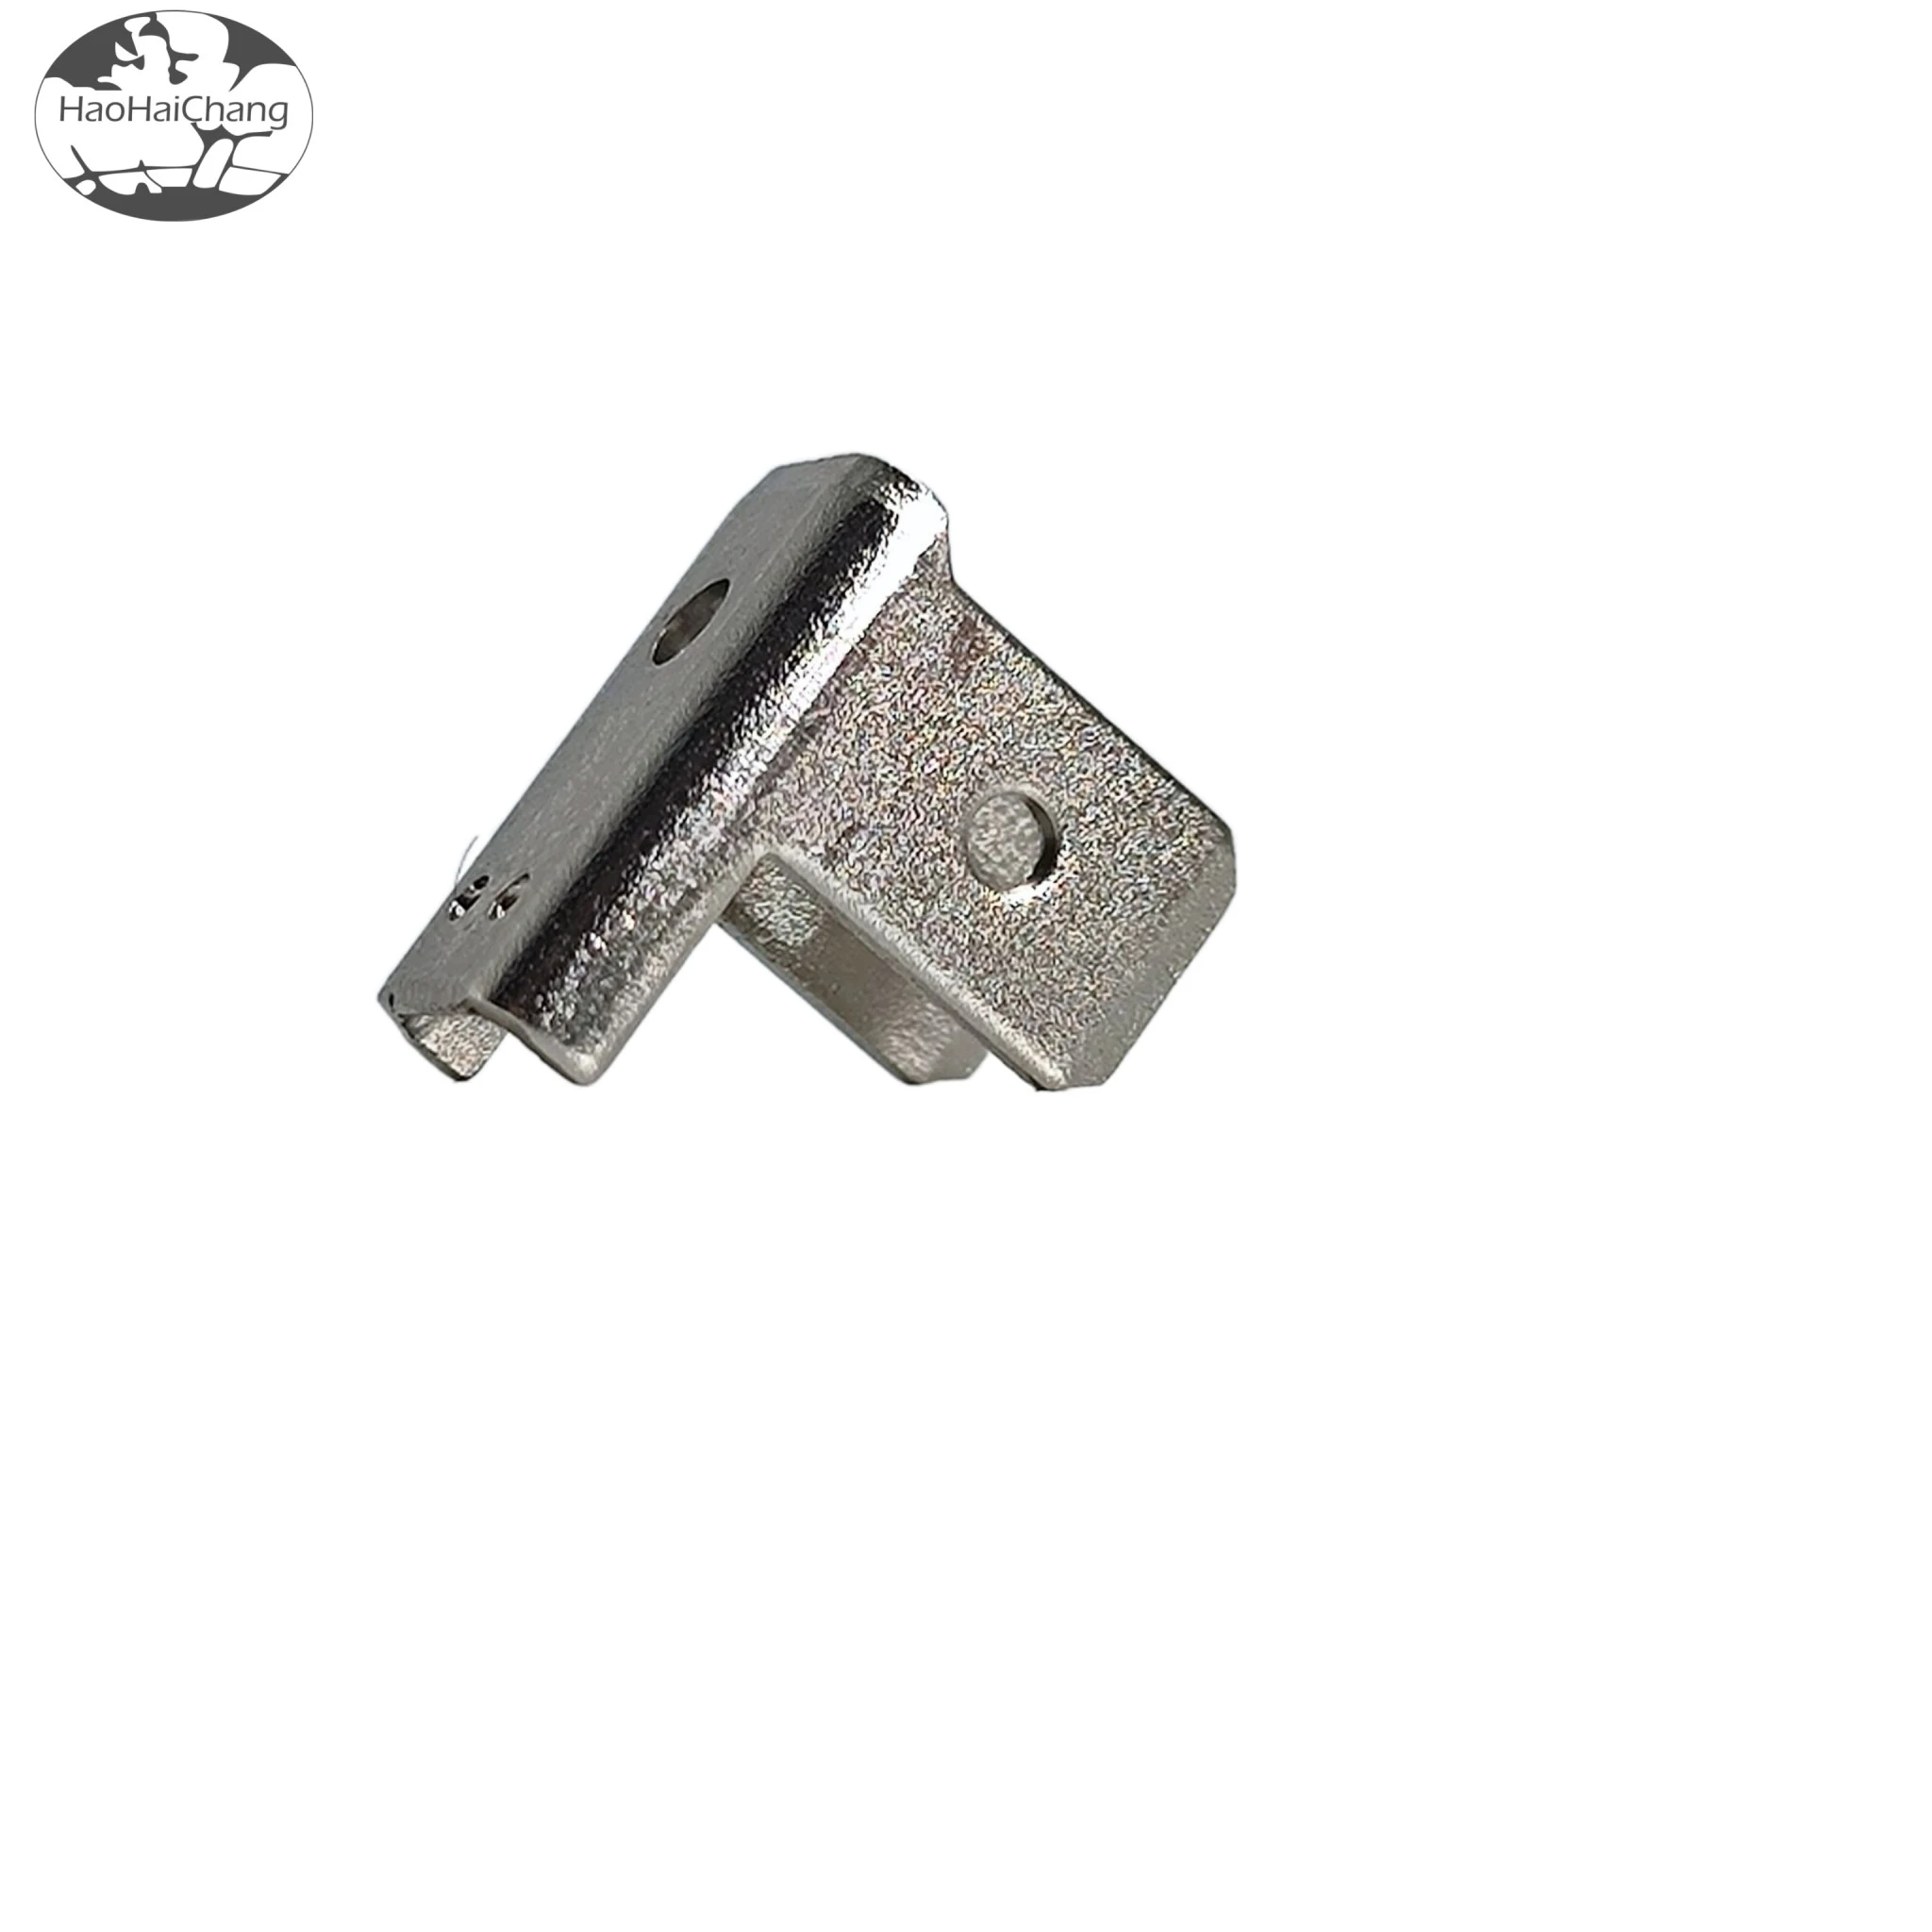 HHC-0136 Connector